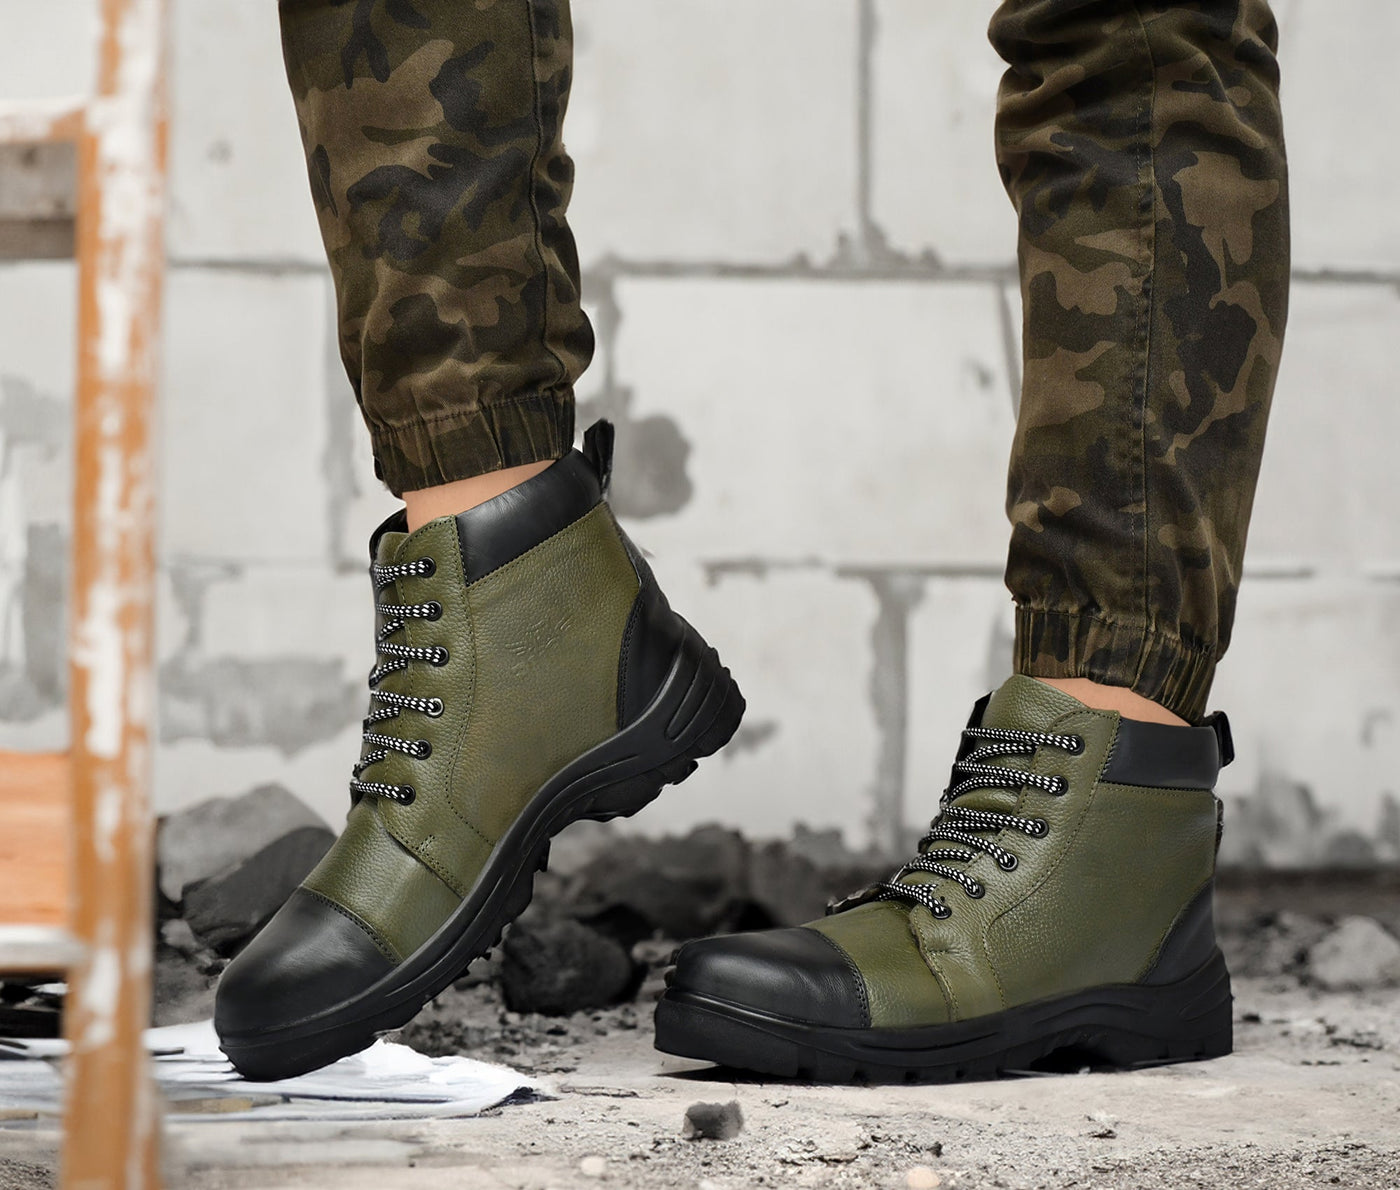 PILLAA- Green Leather Boots for Men.